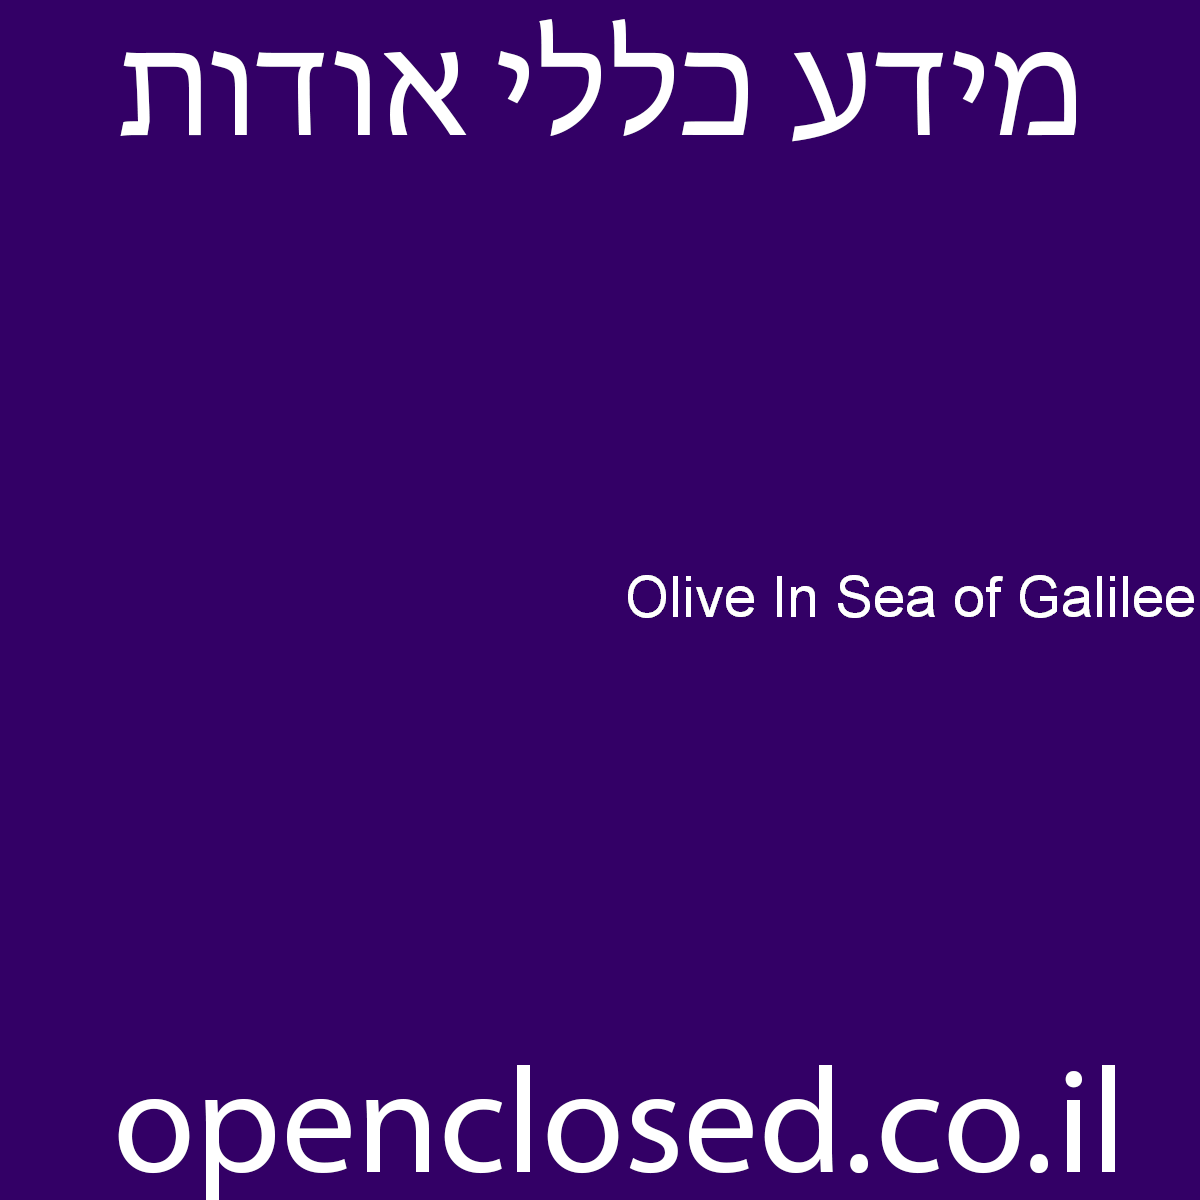 Olive In Sea of Galilee